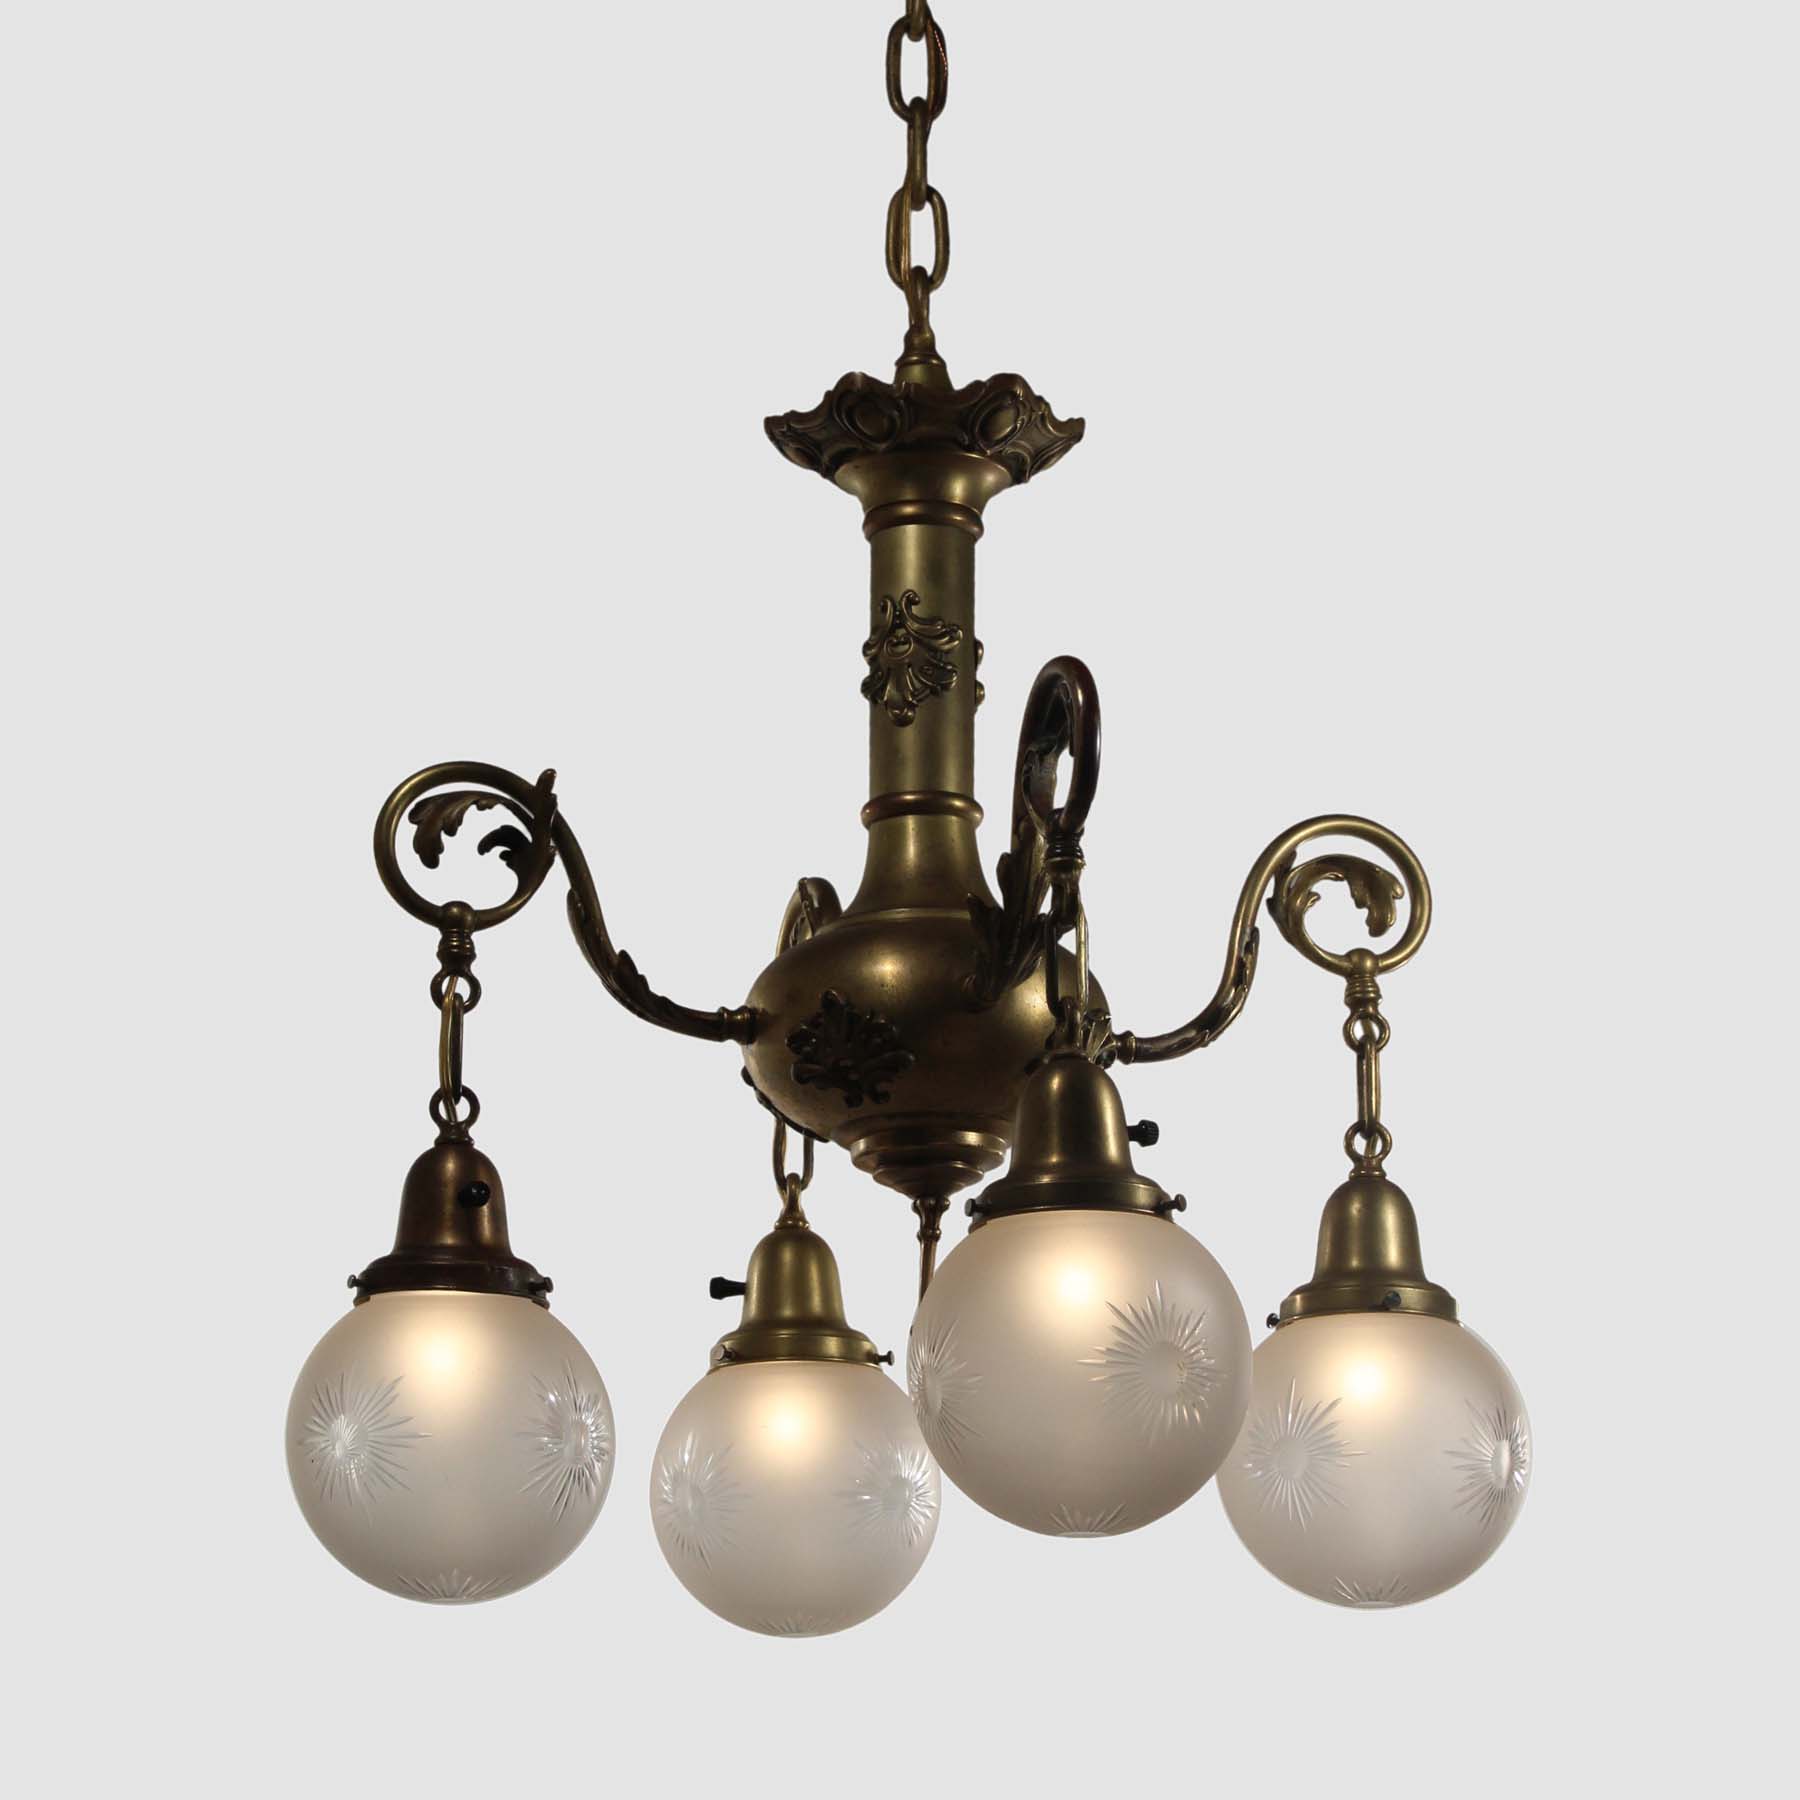 SOLD Neoclassical Chandelier with Wheel Cut Shades, Antique Lighting-67078